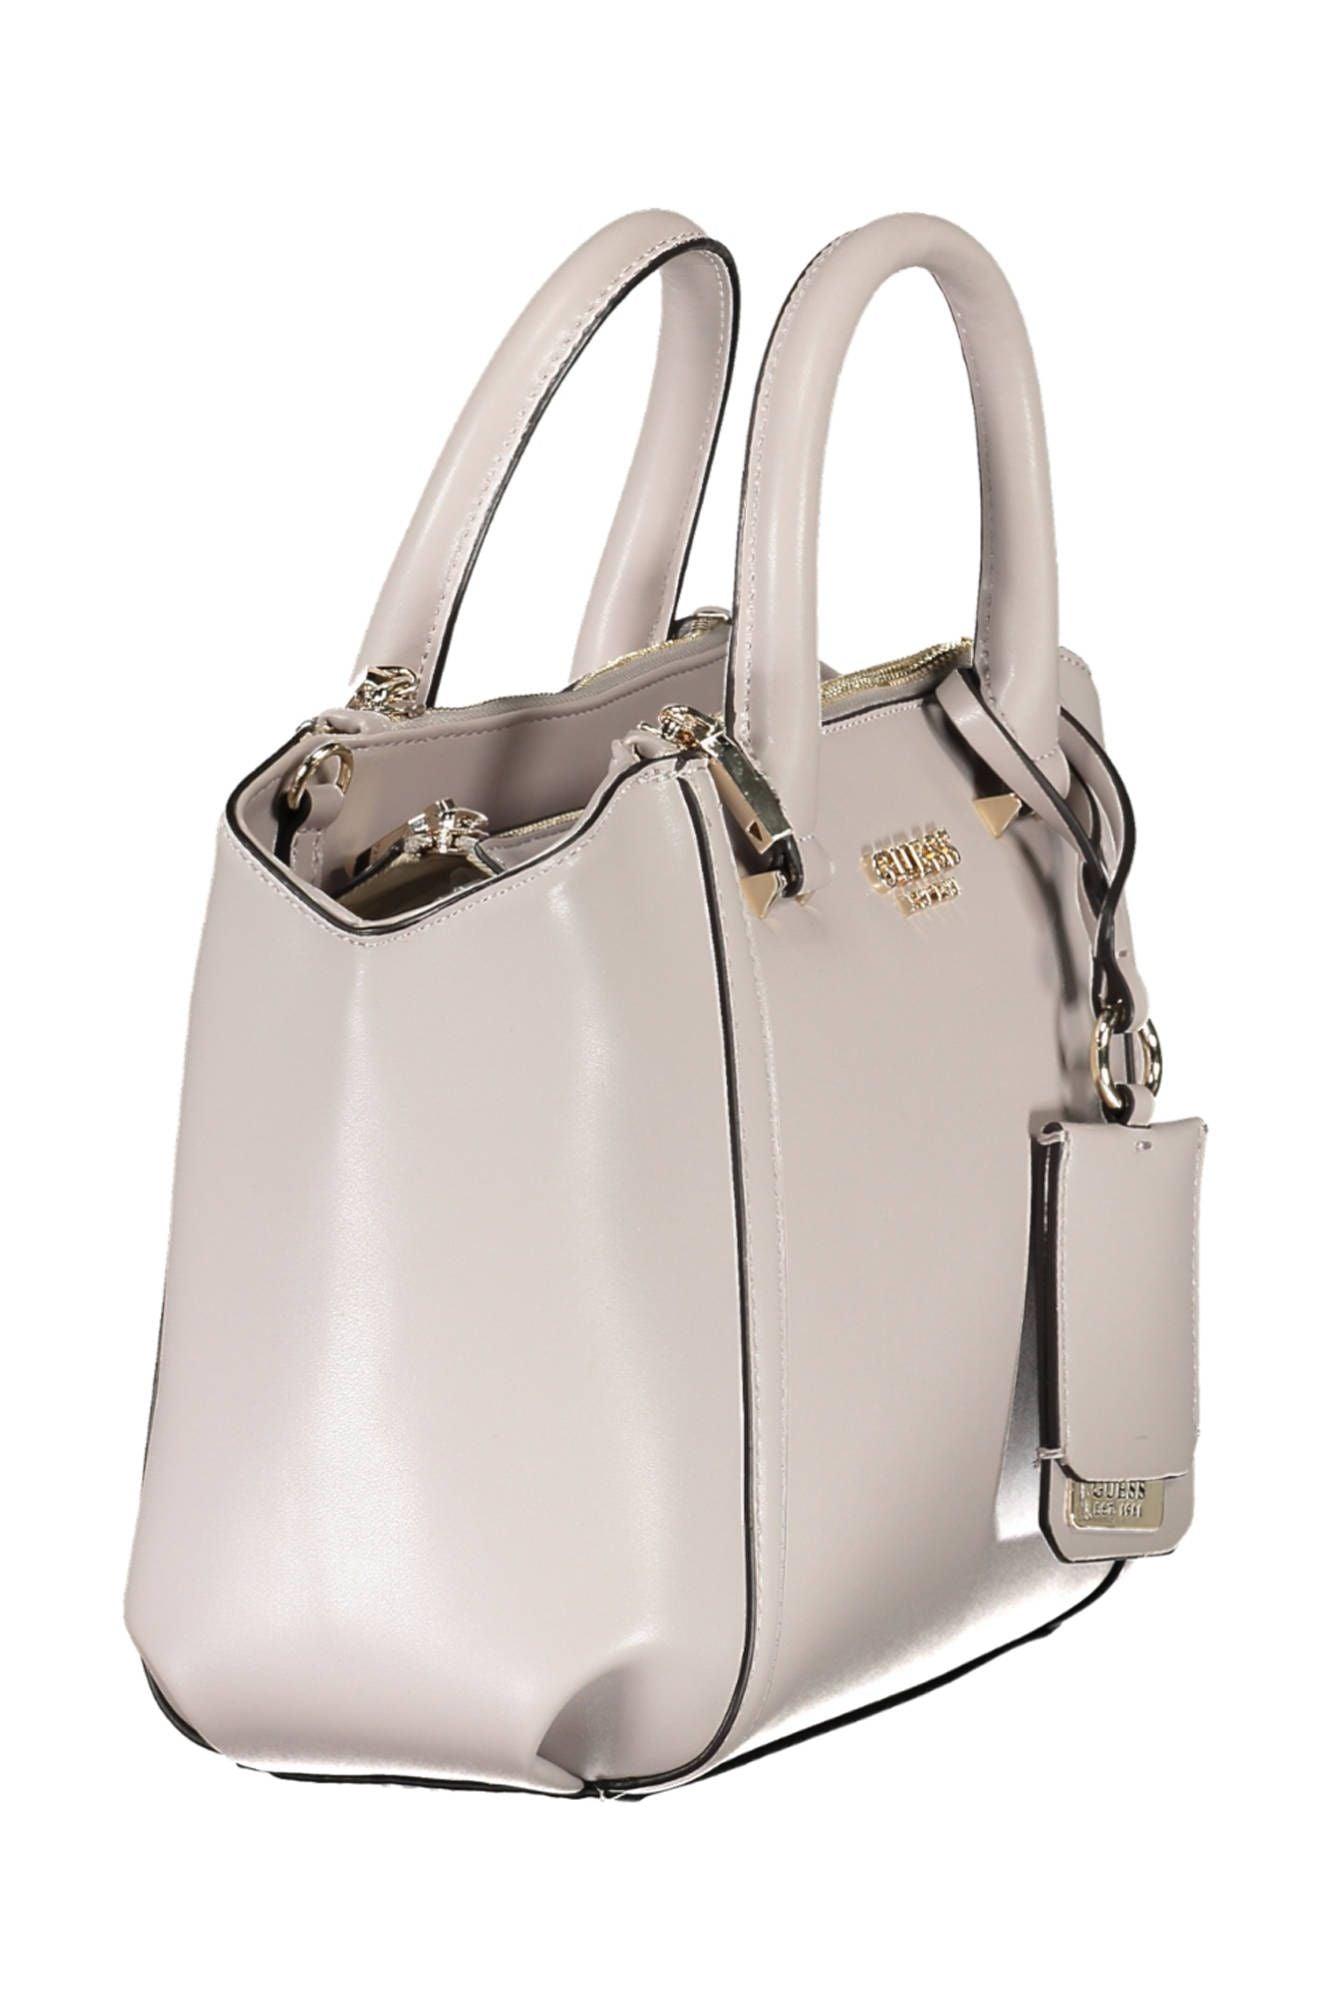 Guess Jeans Elegant Gray Handbag with Contrasting Accents - PER.FASHION